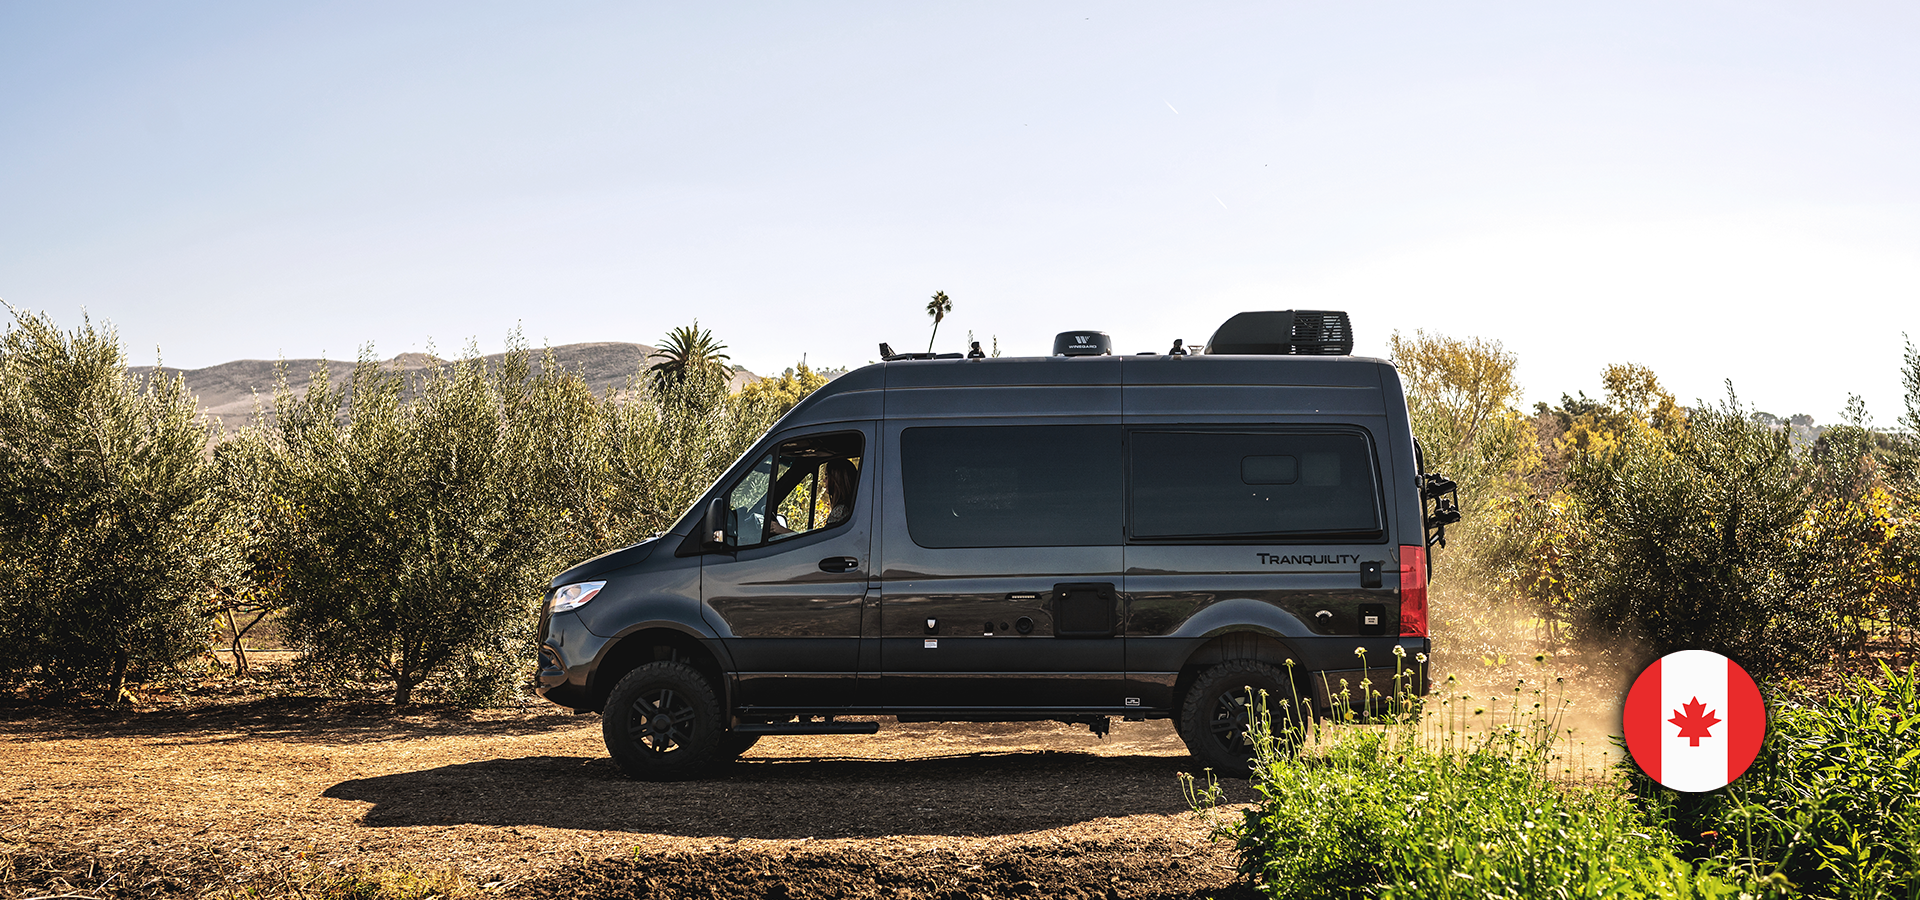 Tranquility Sprinter in desert with canada flag emblem